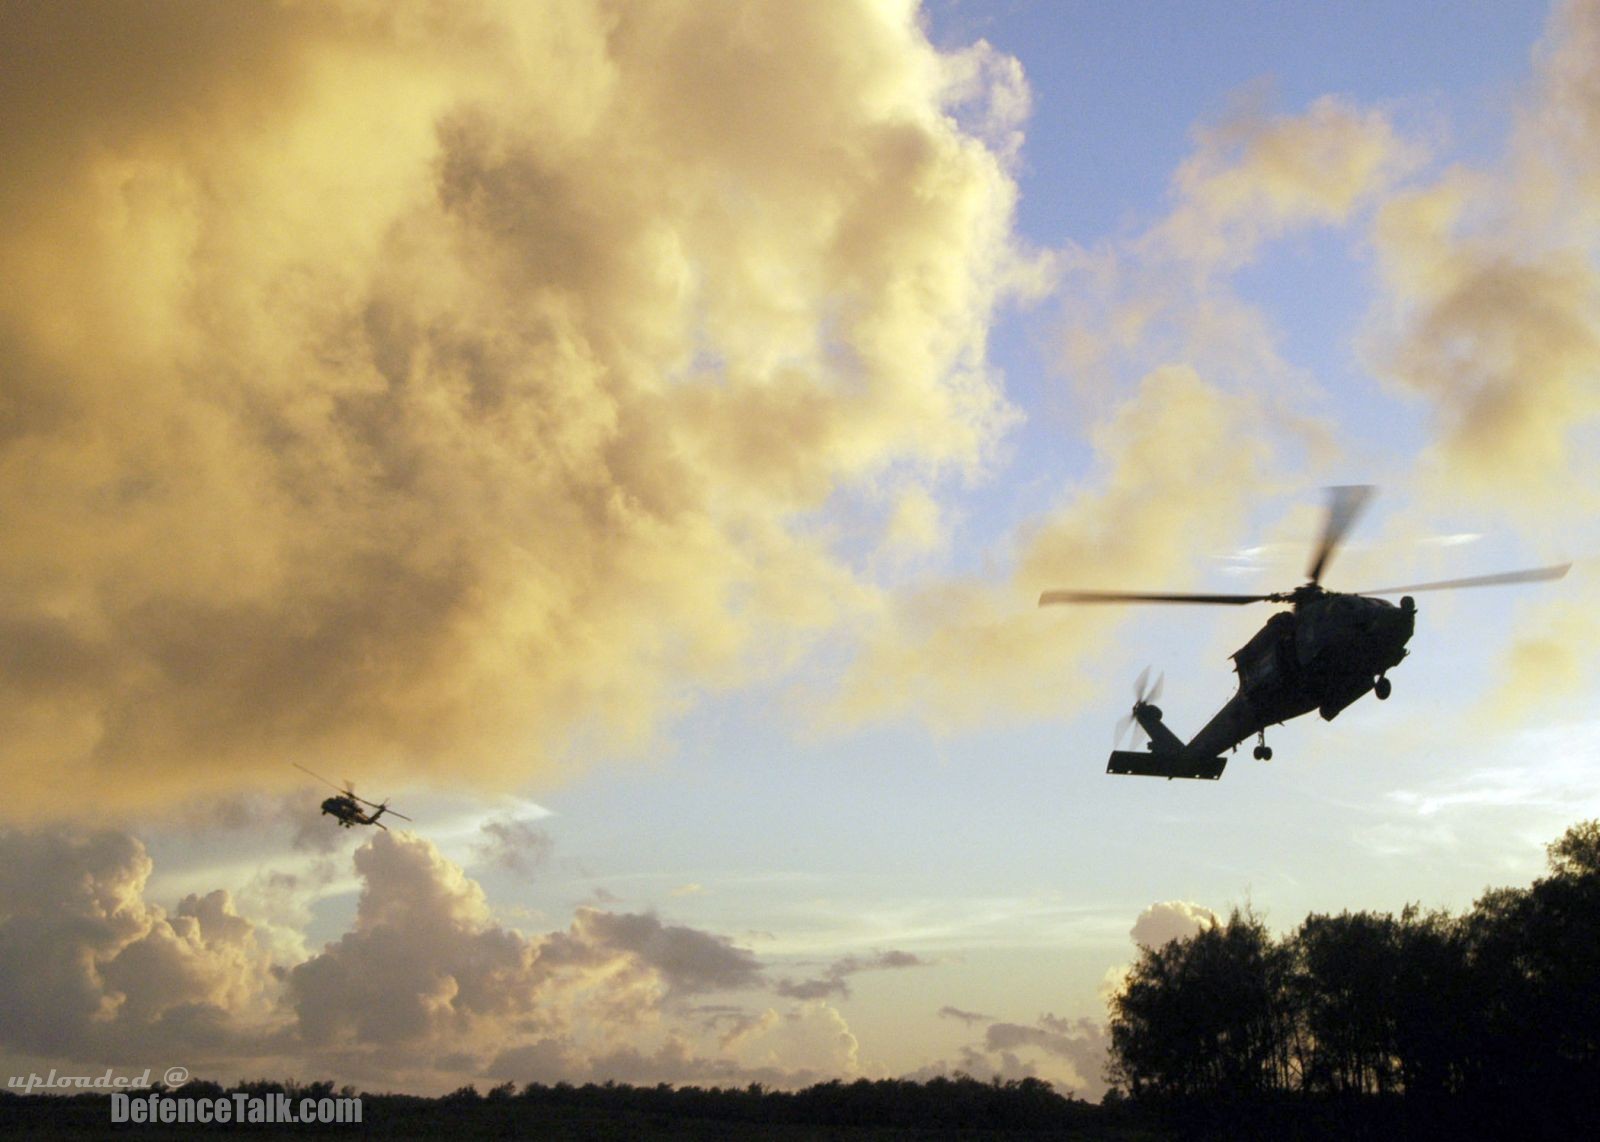 HH-60H helicopter - Valiant Shield 2006 - Strike Warfare Missions